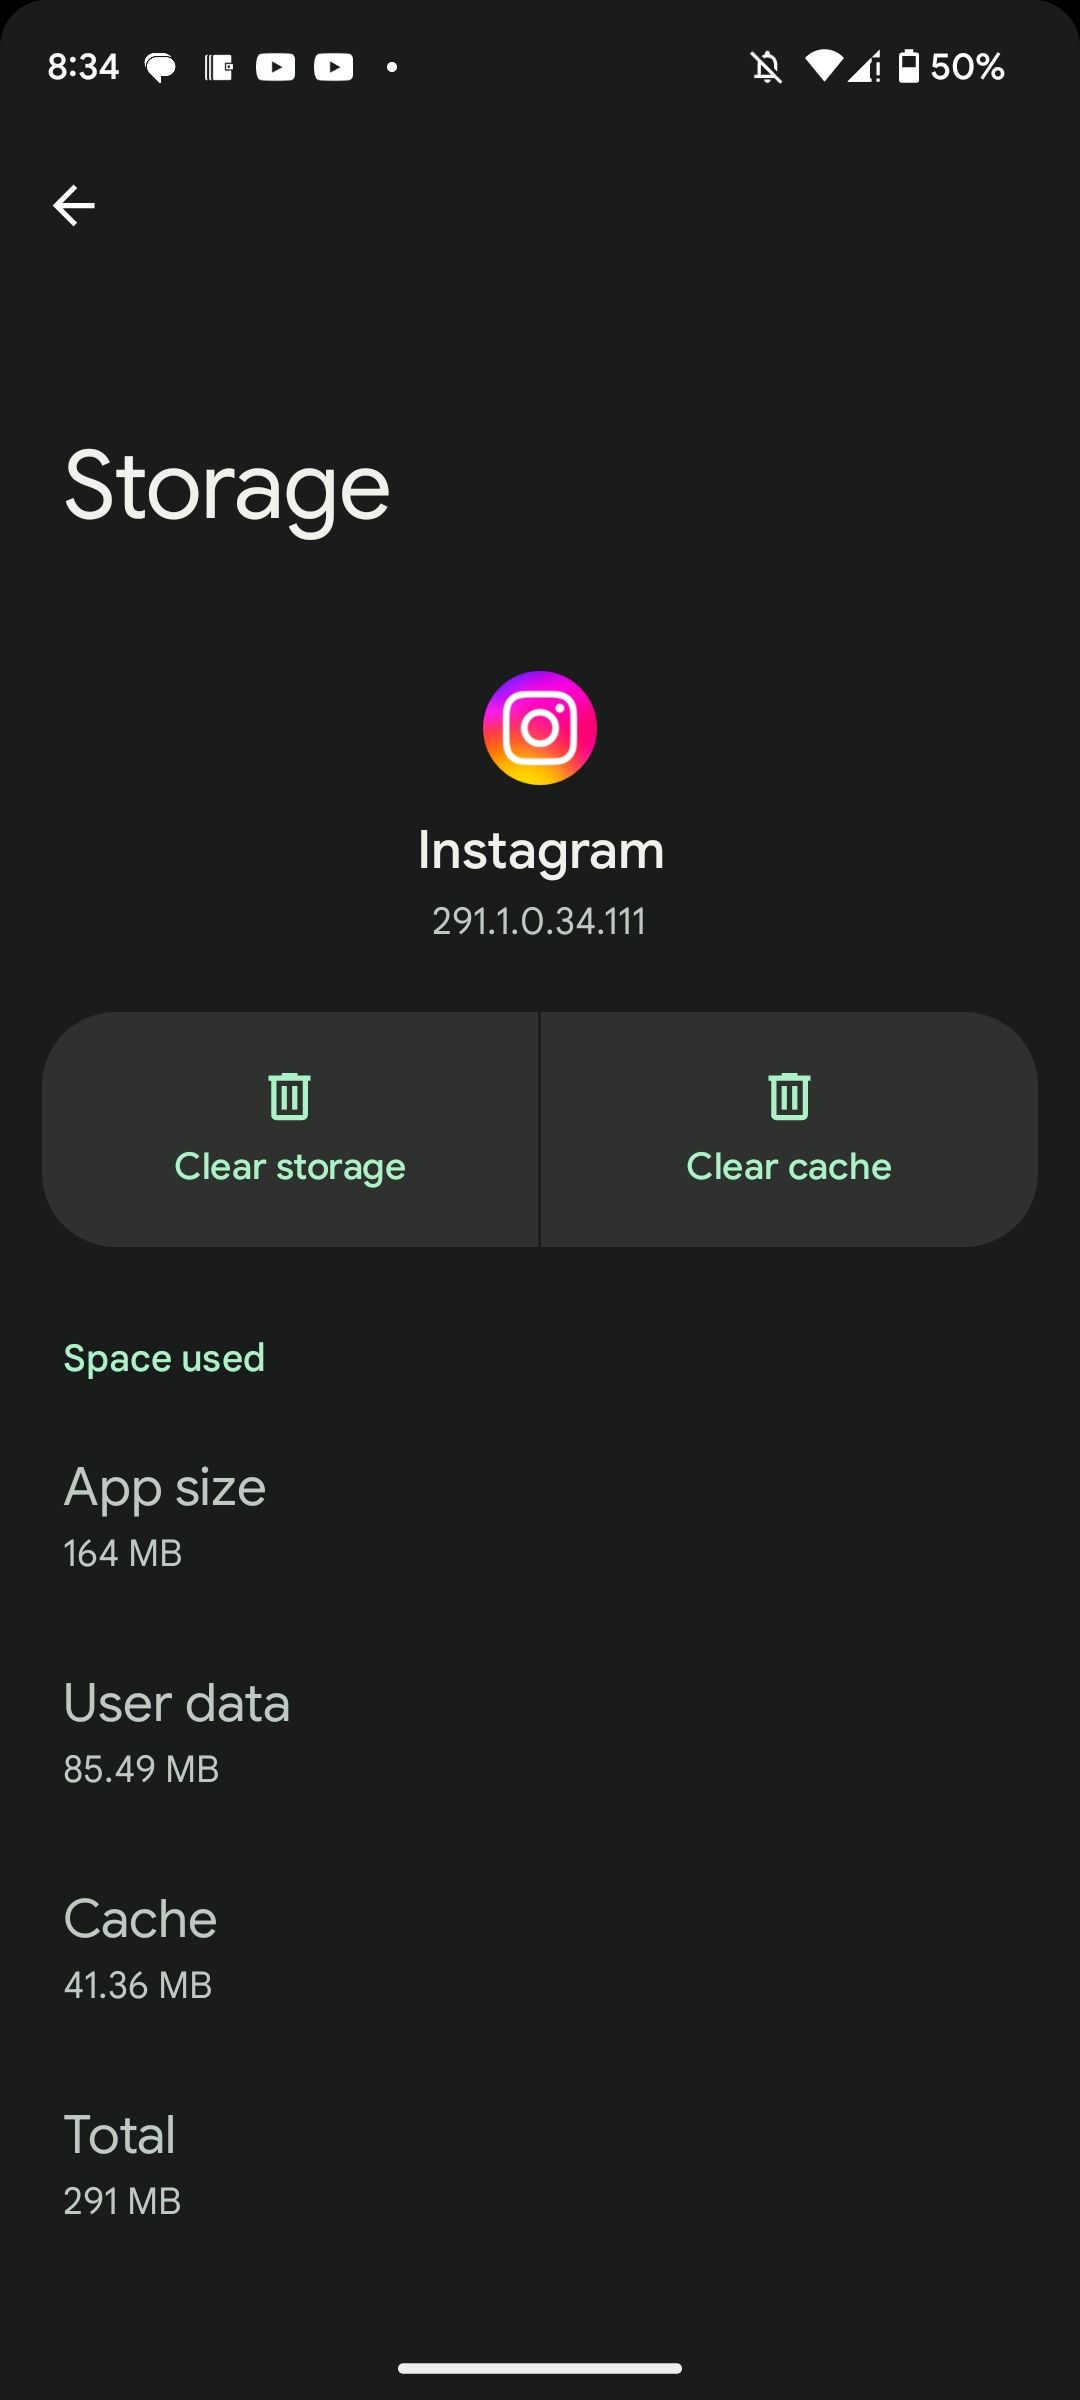 Instagram's Settings page in Android showing storage use